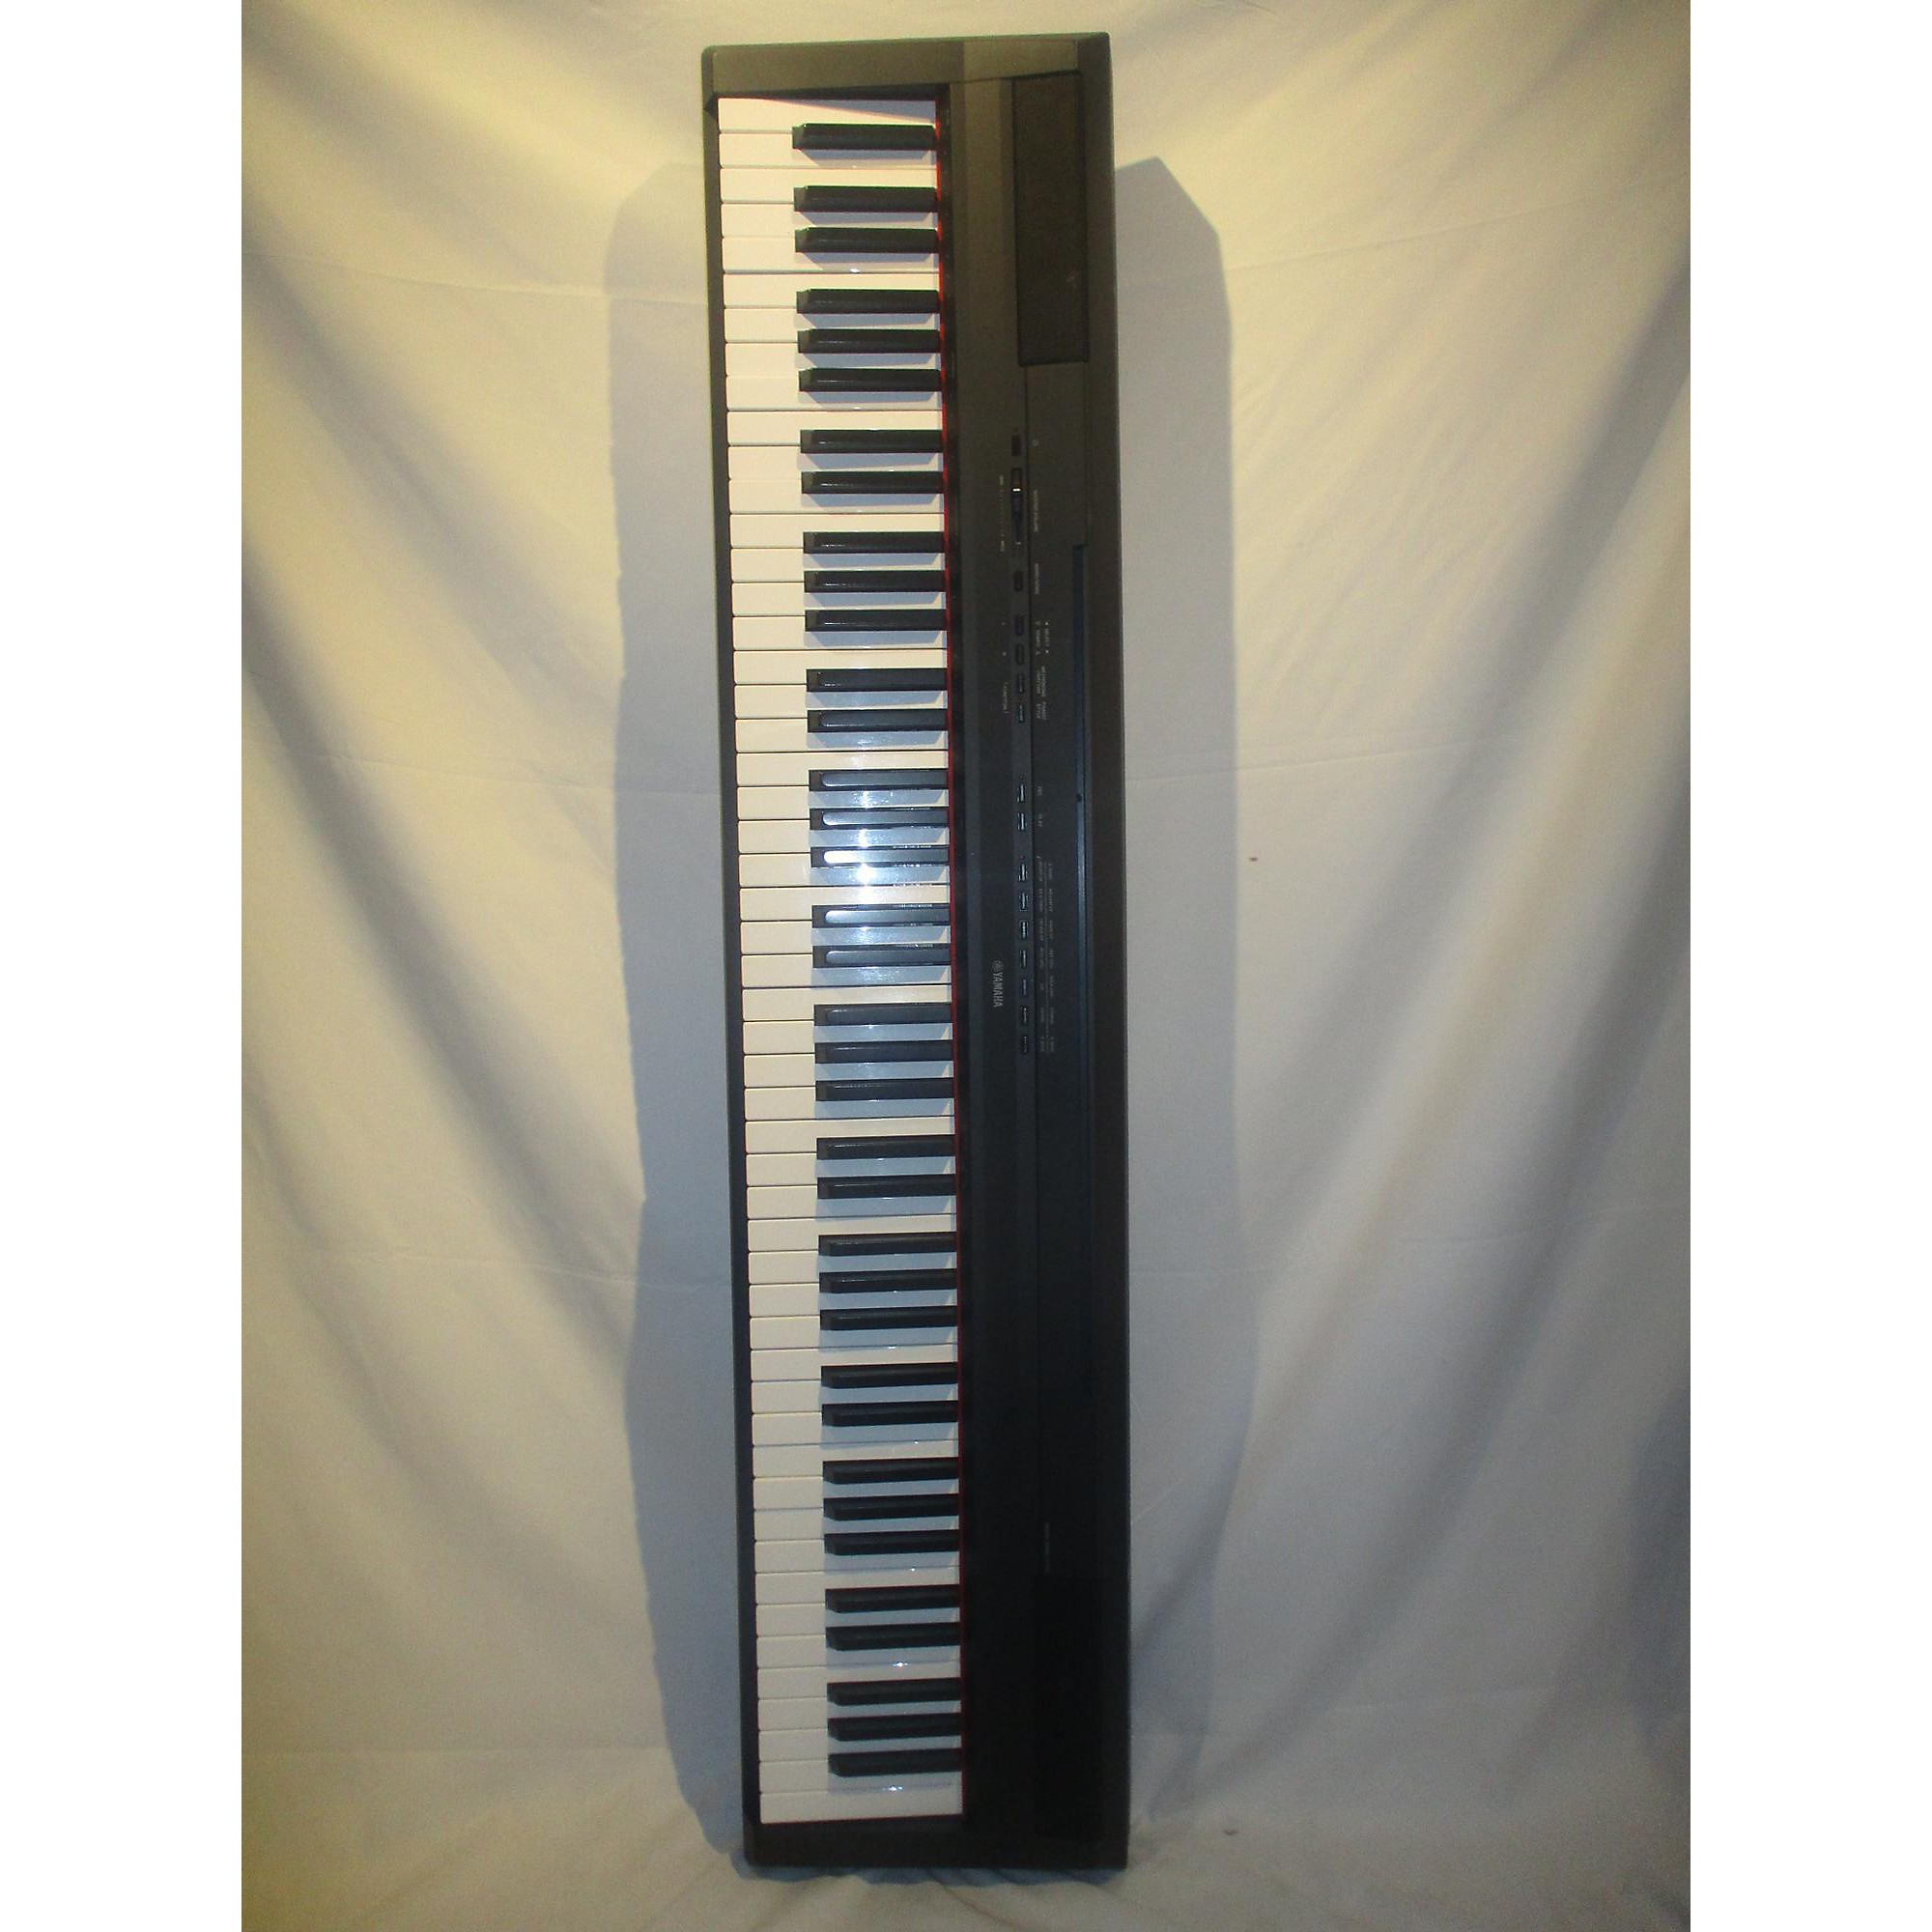 Buy Used 'Yamaha P-45 (Black) for sale' Online